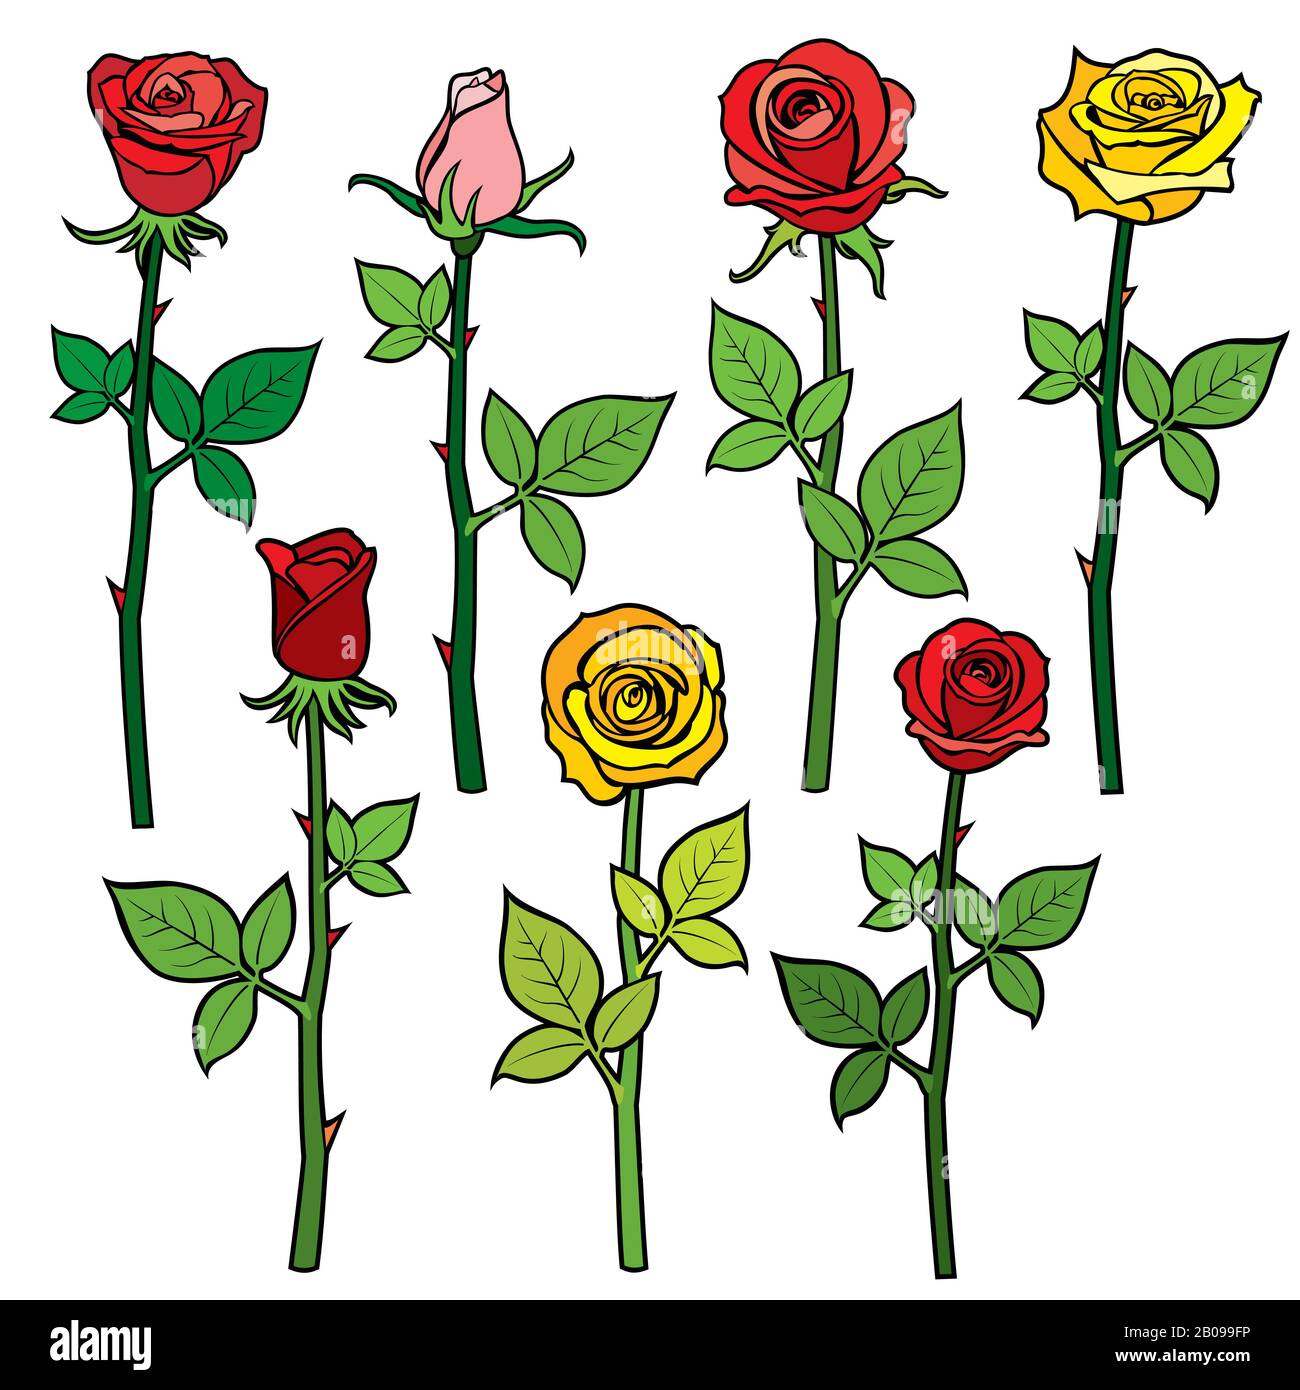 Roses with flower buds isolated on white. cartoon vector illustration. Colored flowers rose yellow and red, floral cartoon plant, blossom roses illustration Stock Vector